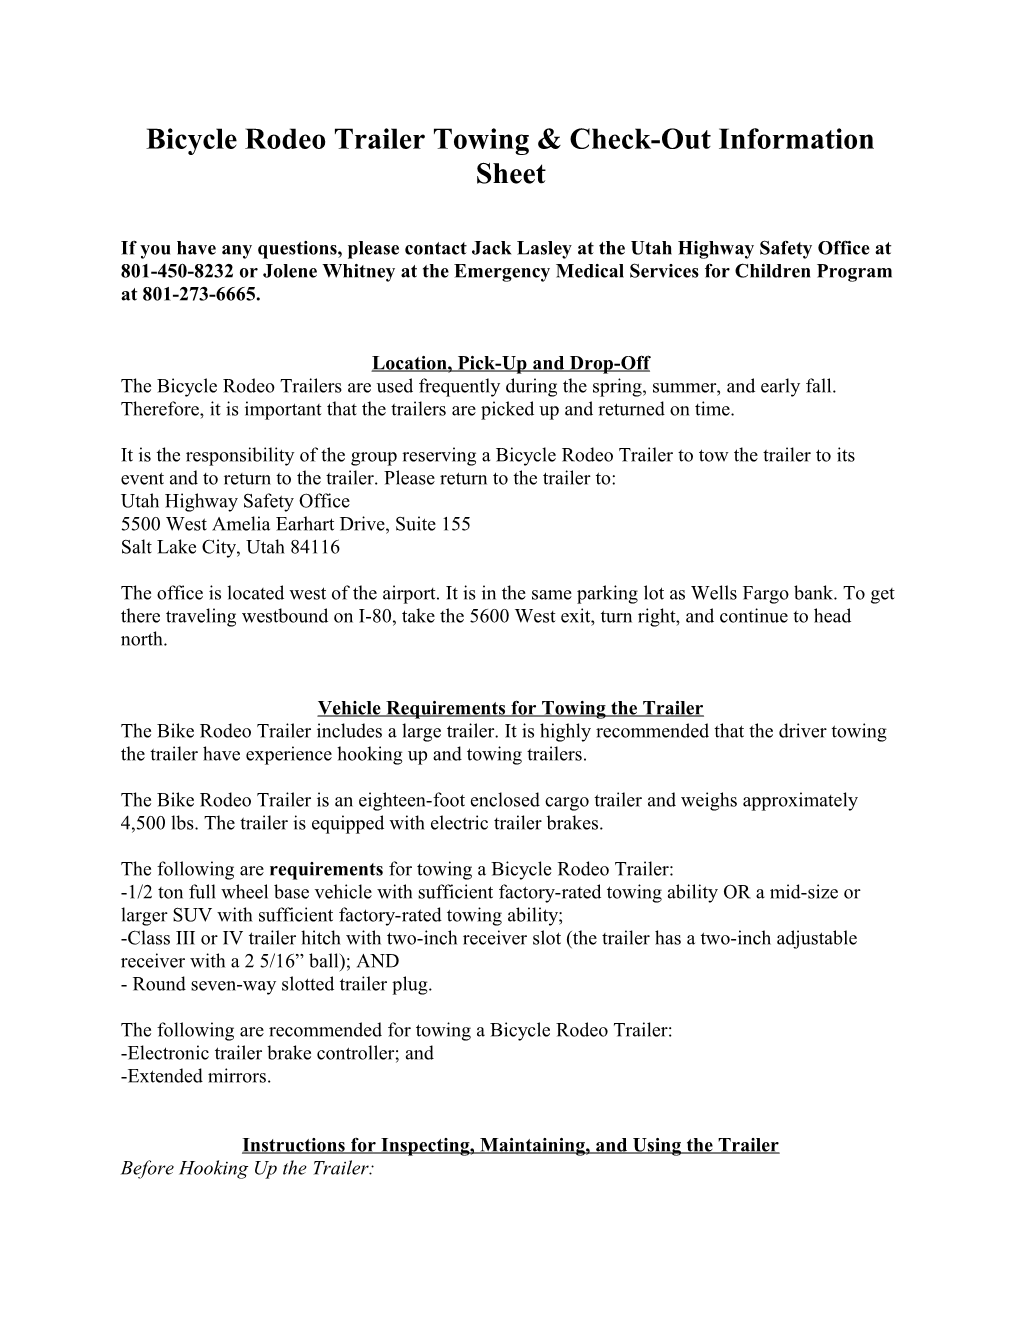 Bicycle Rodeo Trailer Towing & Check-Out Information Sheet